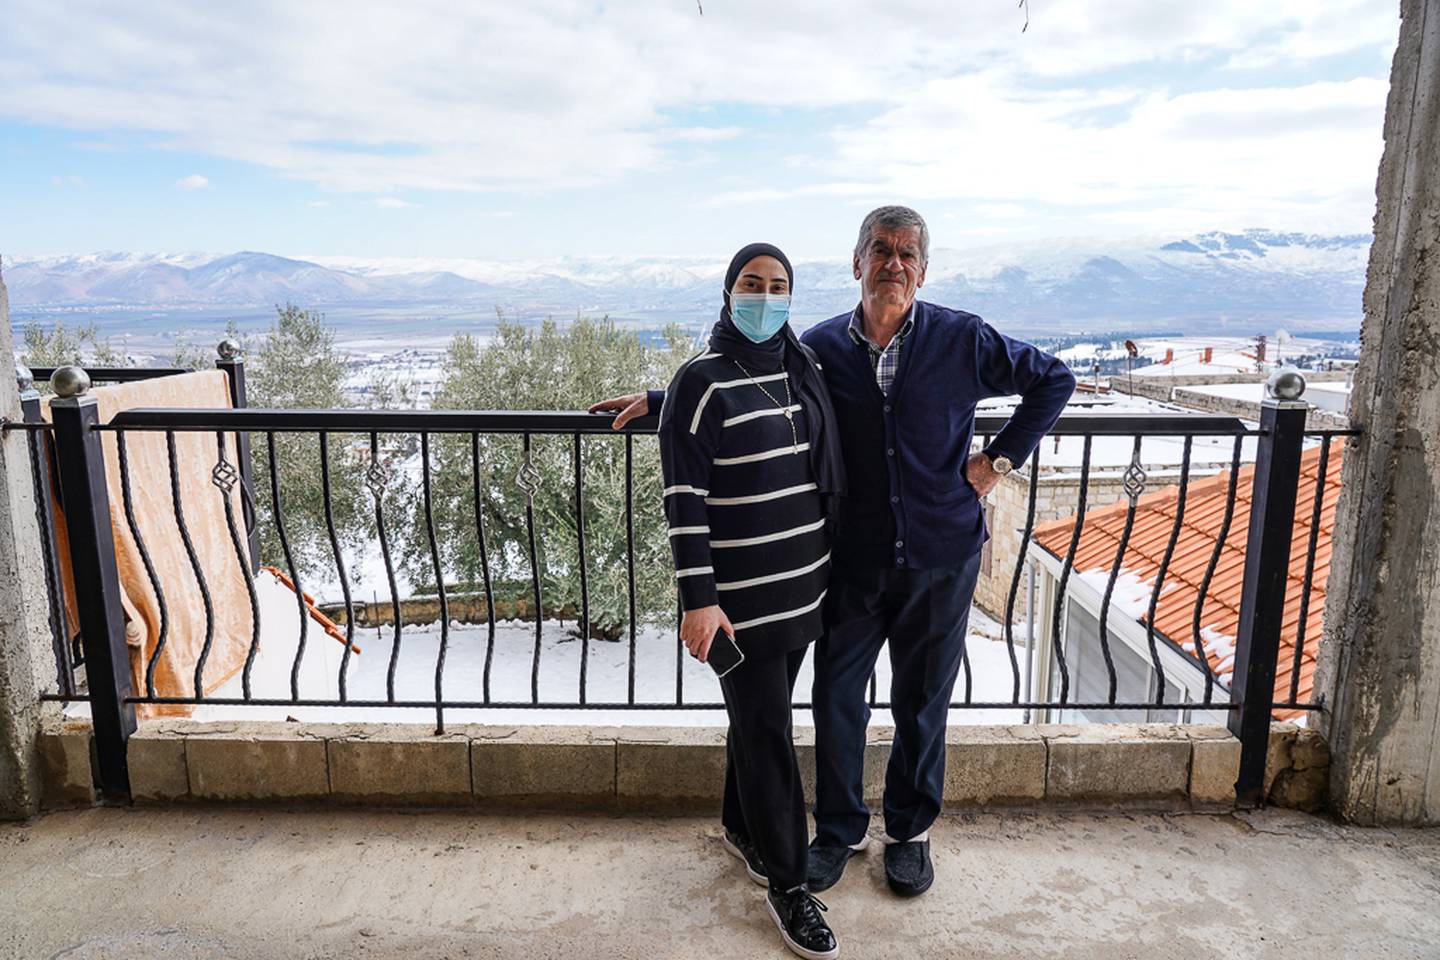 Abdallah Assaii's sister, Fatima, and father, Ali, stand on the balcony of their home in the town of Kefraya in Lebanon's Bekaa Valley. Finbar Anderson/ The National